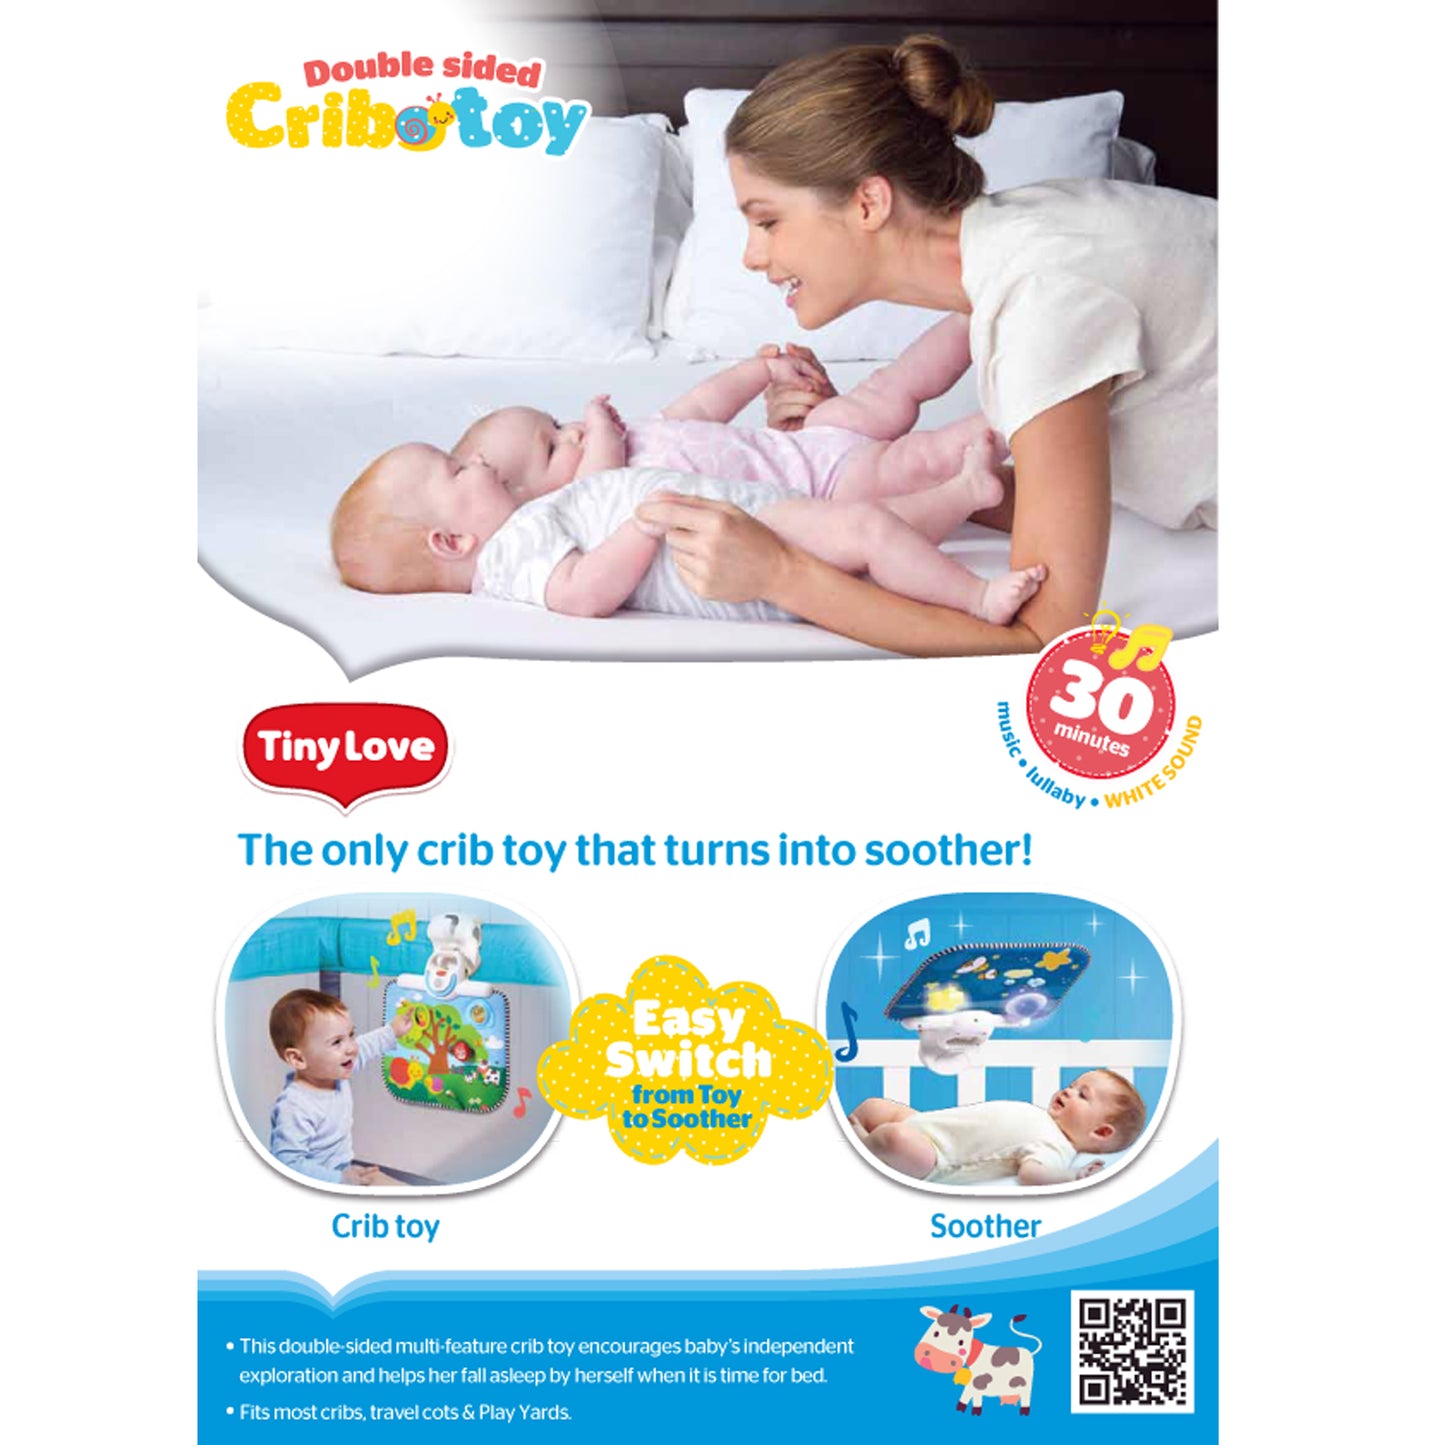 Double Sided Crib Toy